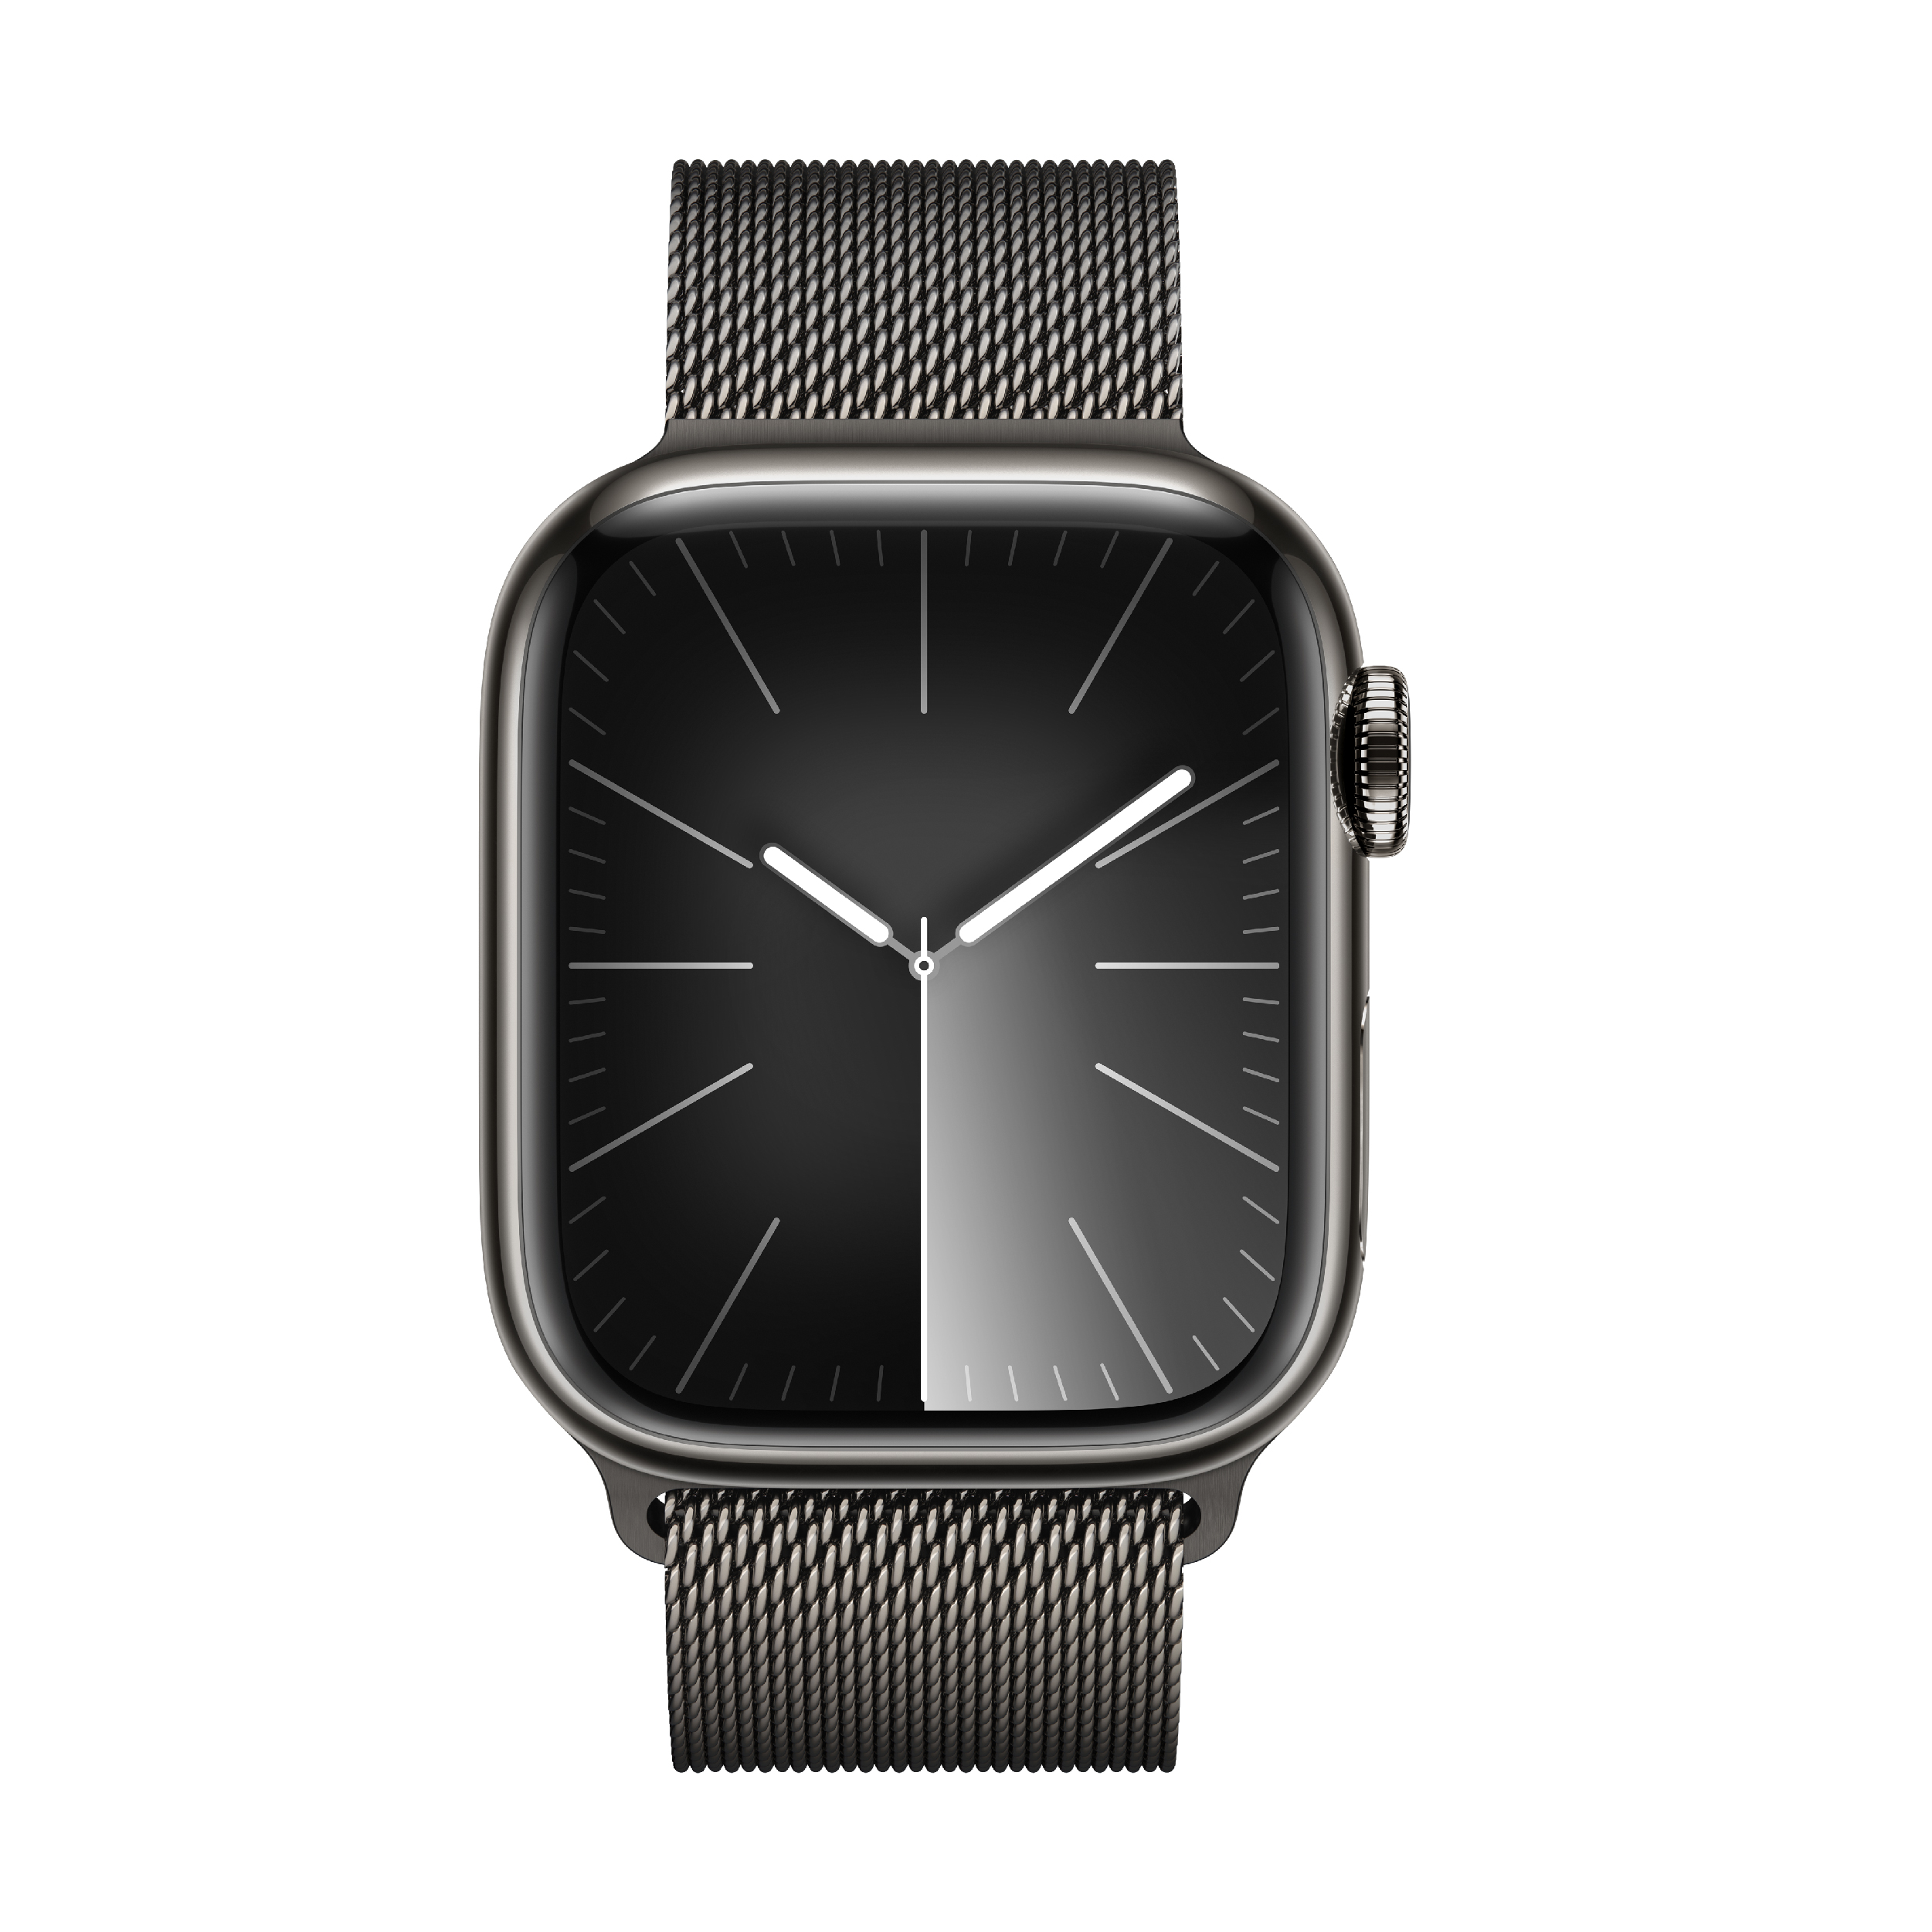 APPLE Smartwatch Series 9 GPS + Cellular 45 mm,Graphite Stainless Steel with Graphite Milanese Loop Strap